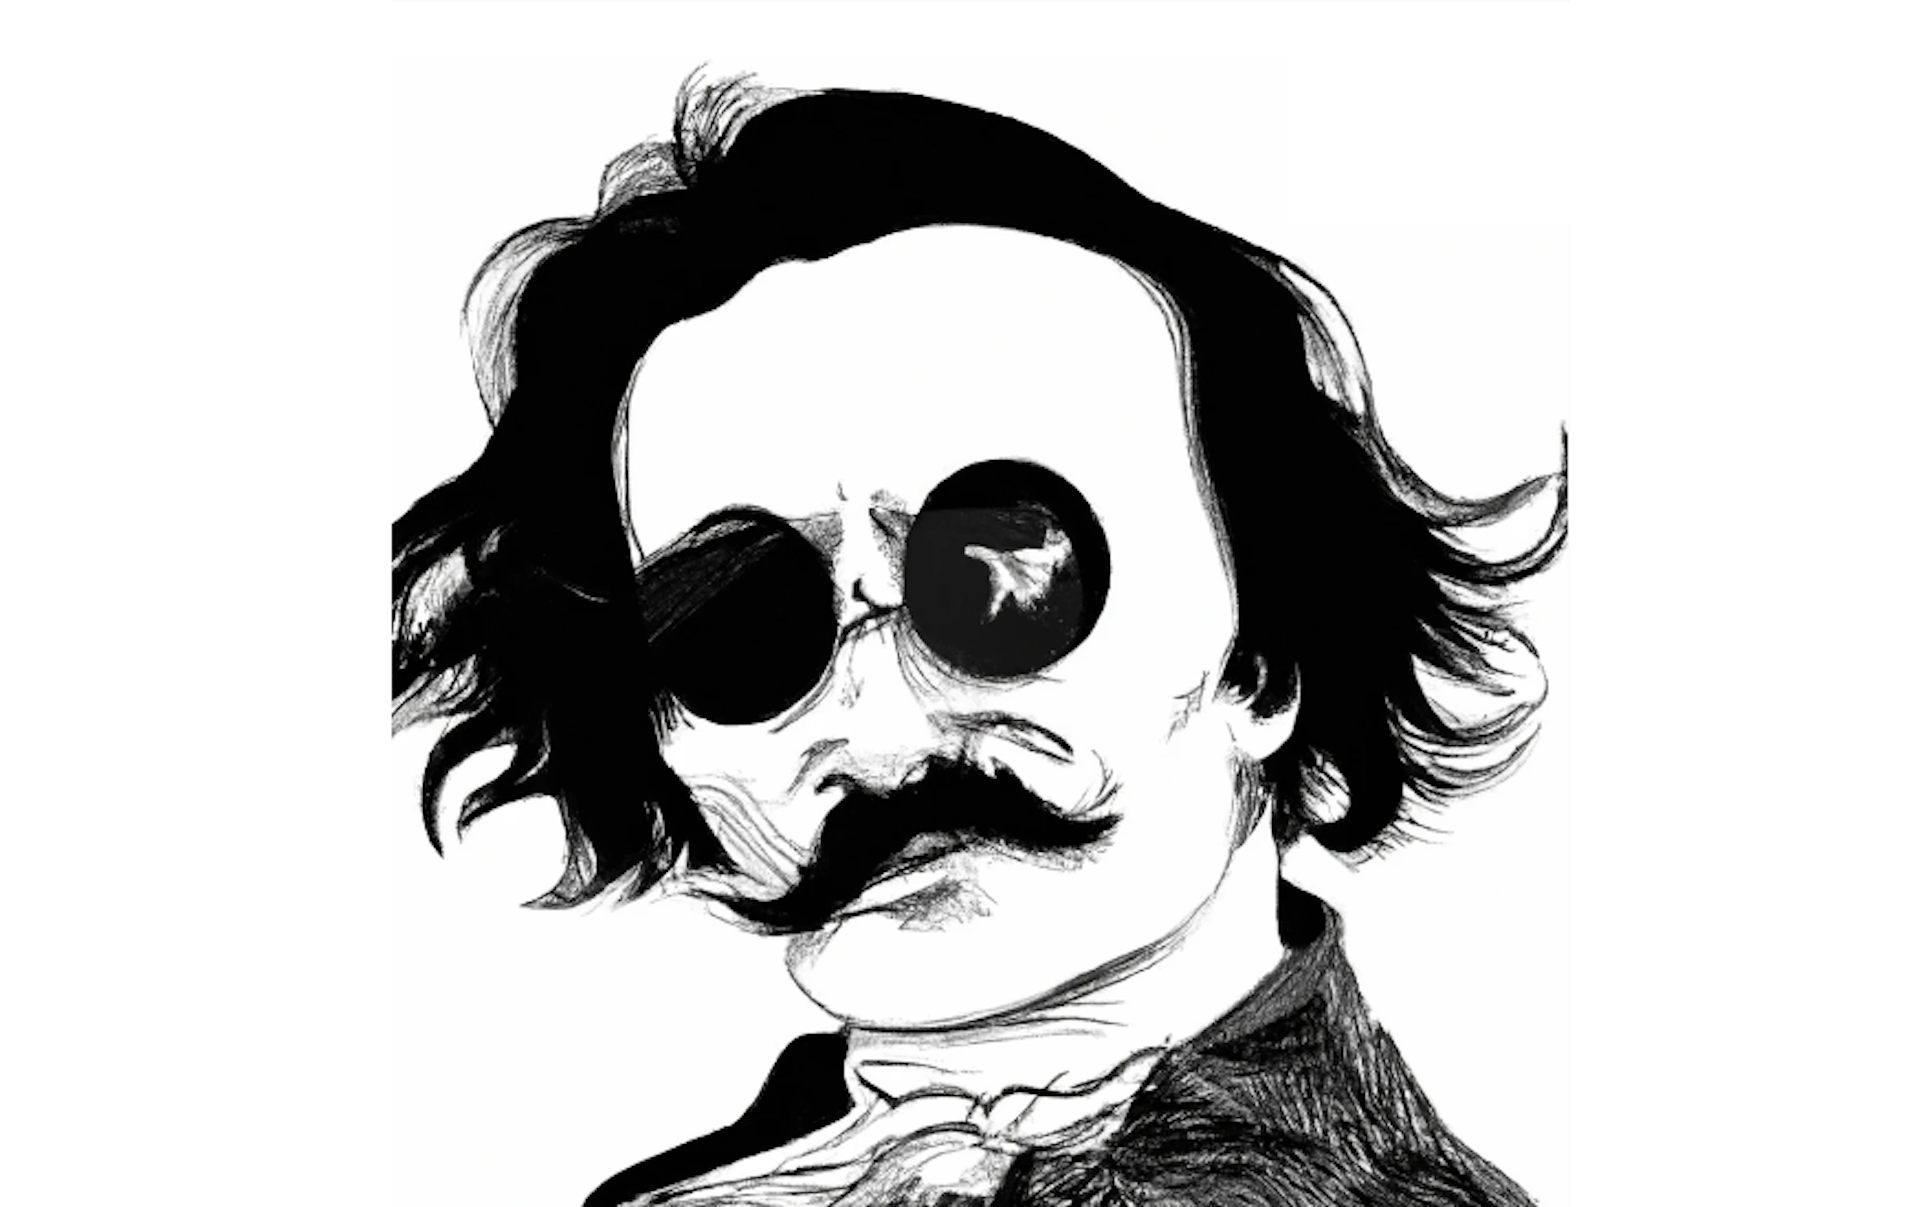 How Edgar Allan Poe Became the Darling of the Maligned and Misunderstood